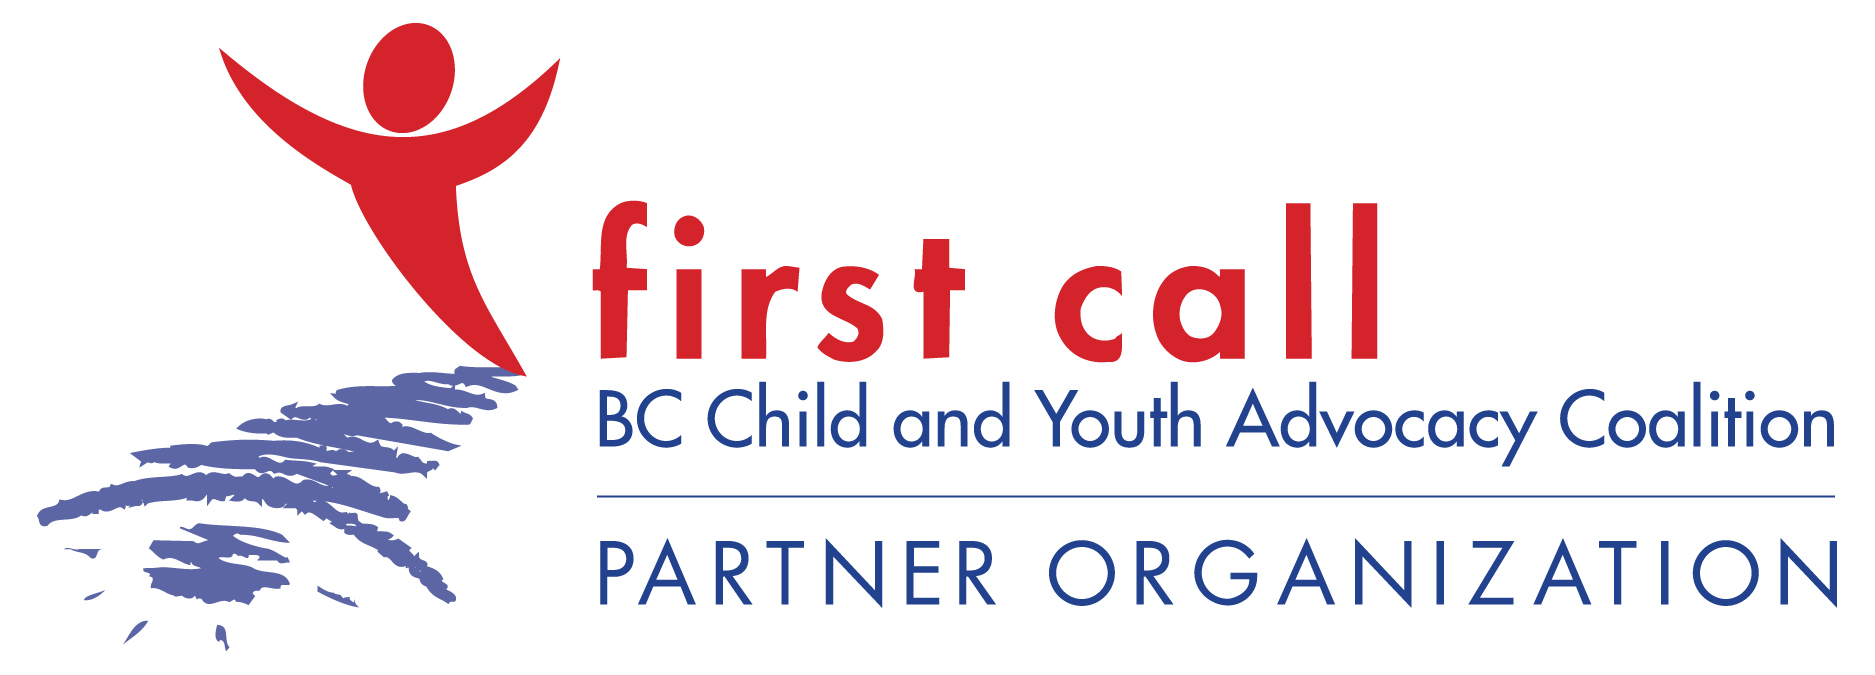 First Call: BC Child and Youth Advocacy Coalition logo